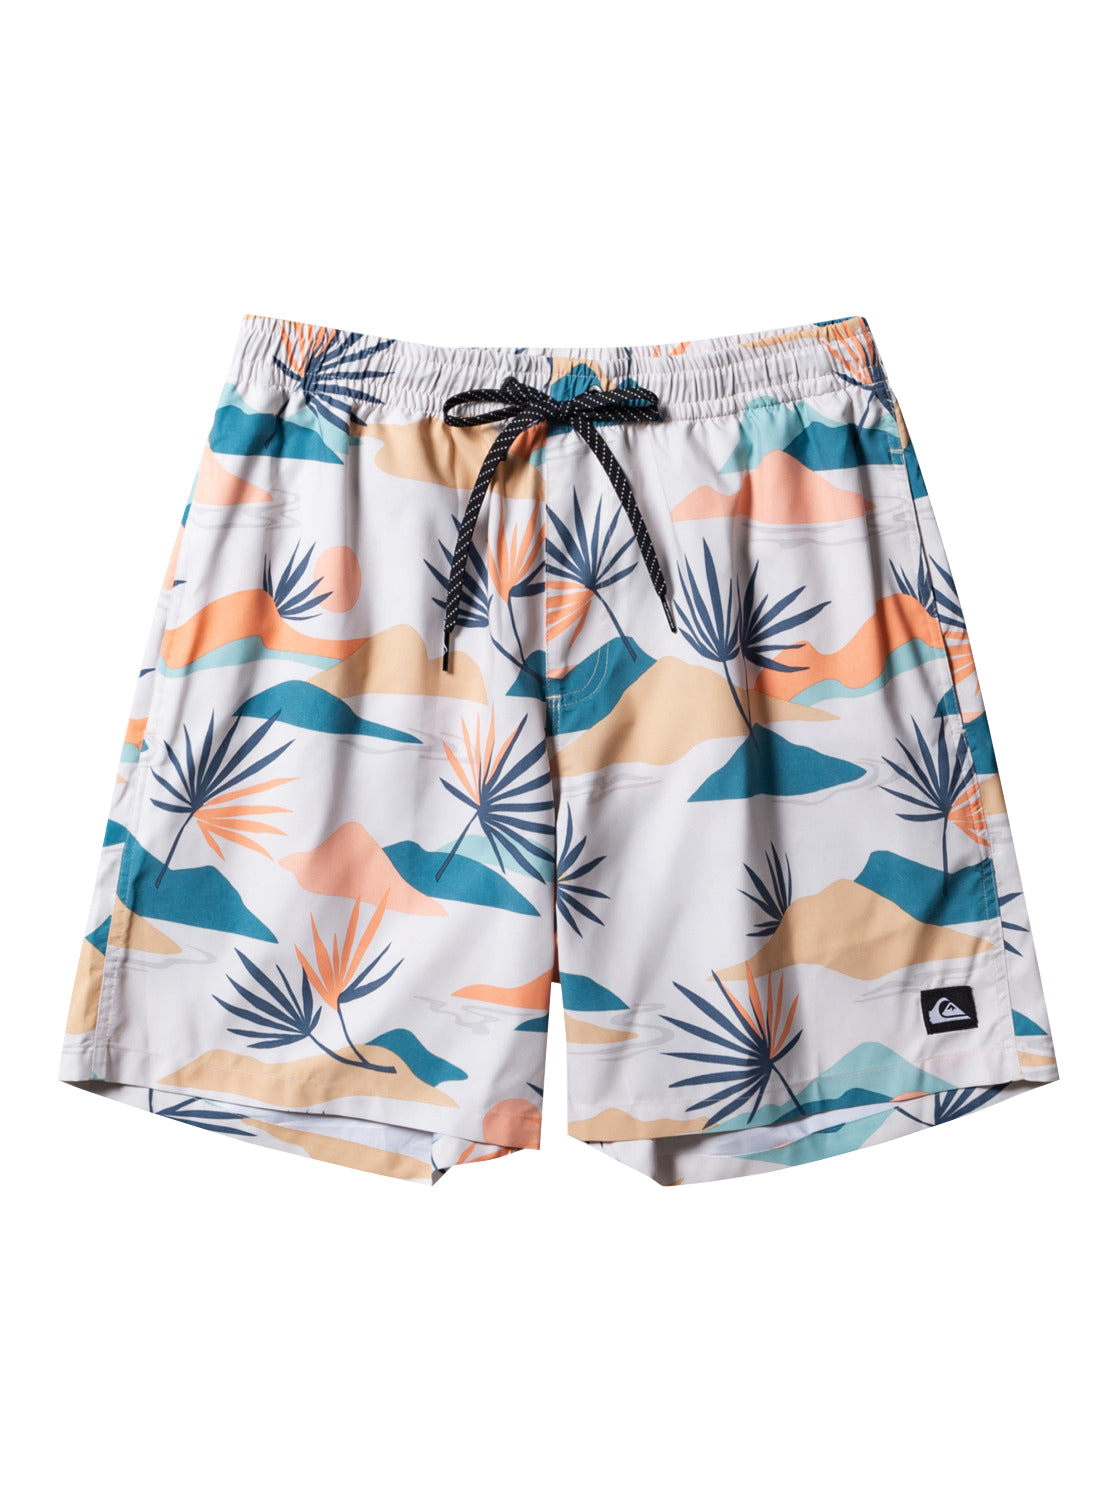 Quiksilver Everyday Jam Mixed Volley 17" Shorts WDW7 XL